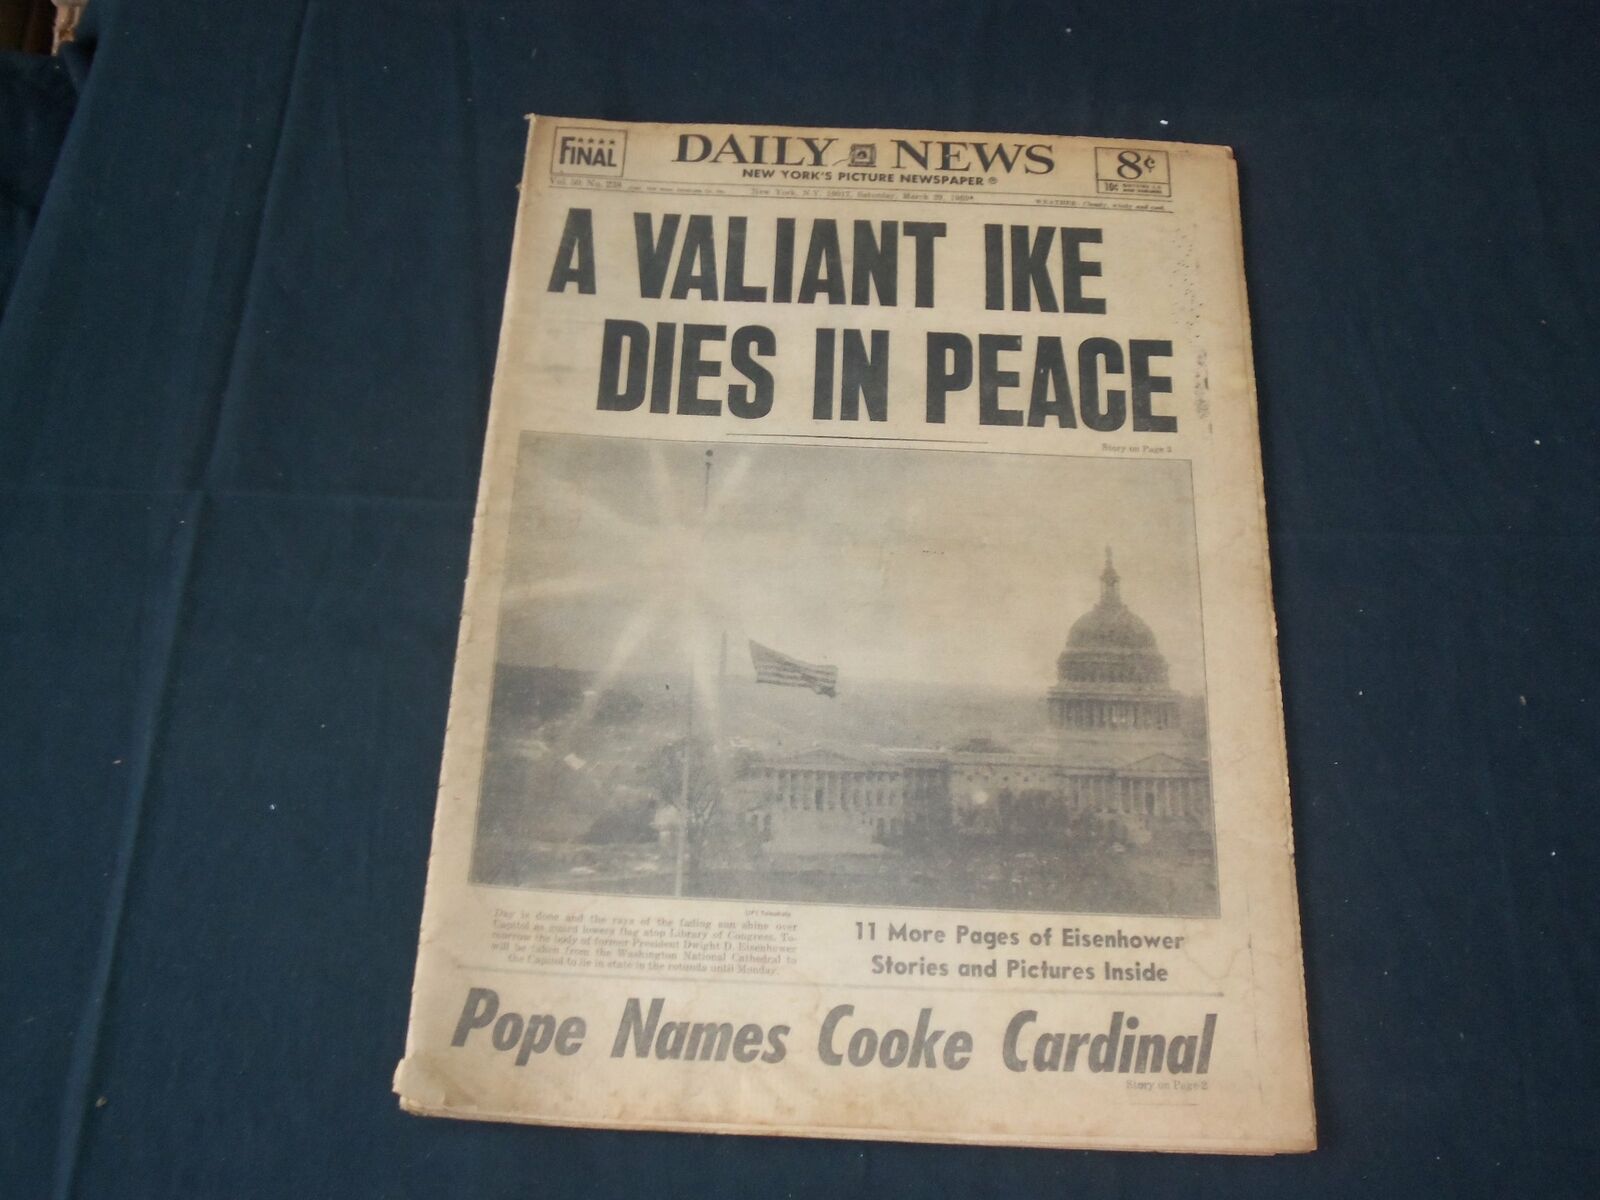 1969 MARCH 29 NEW YORK DAILY NEWS NEWSPAPER - DWIGHT EISENHOWER DIED - NP 3595